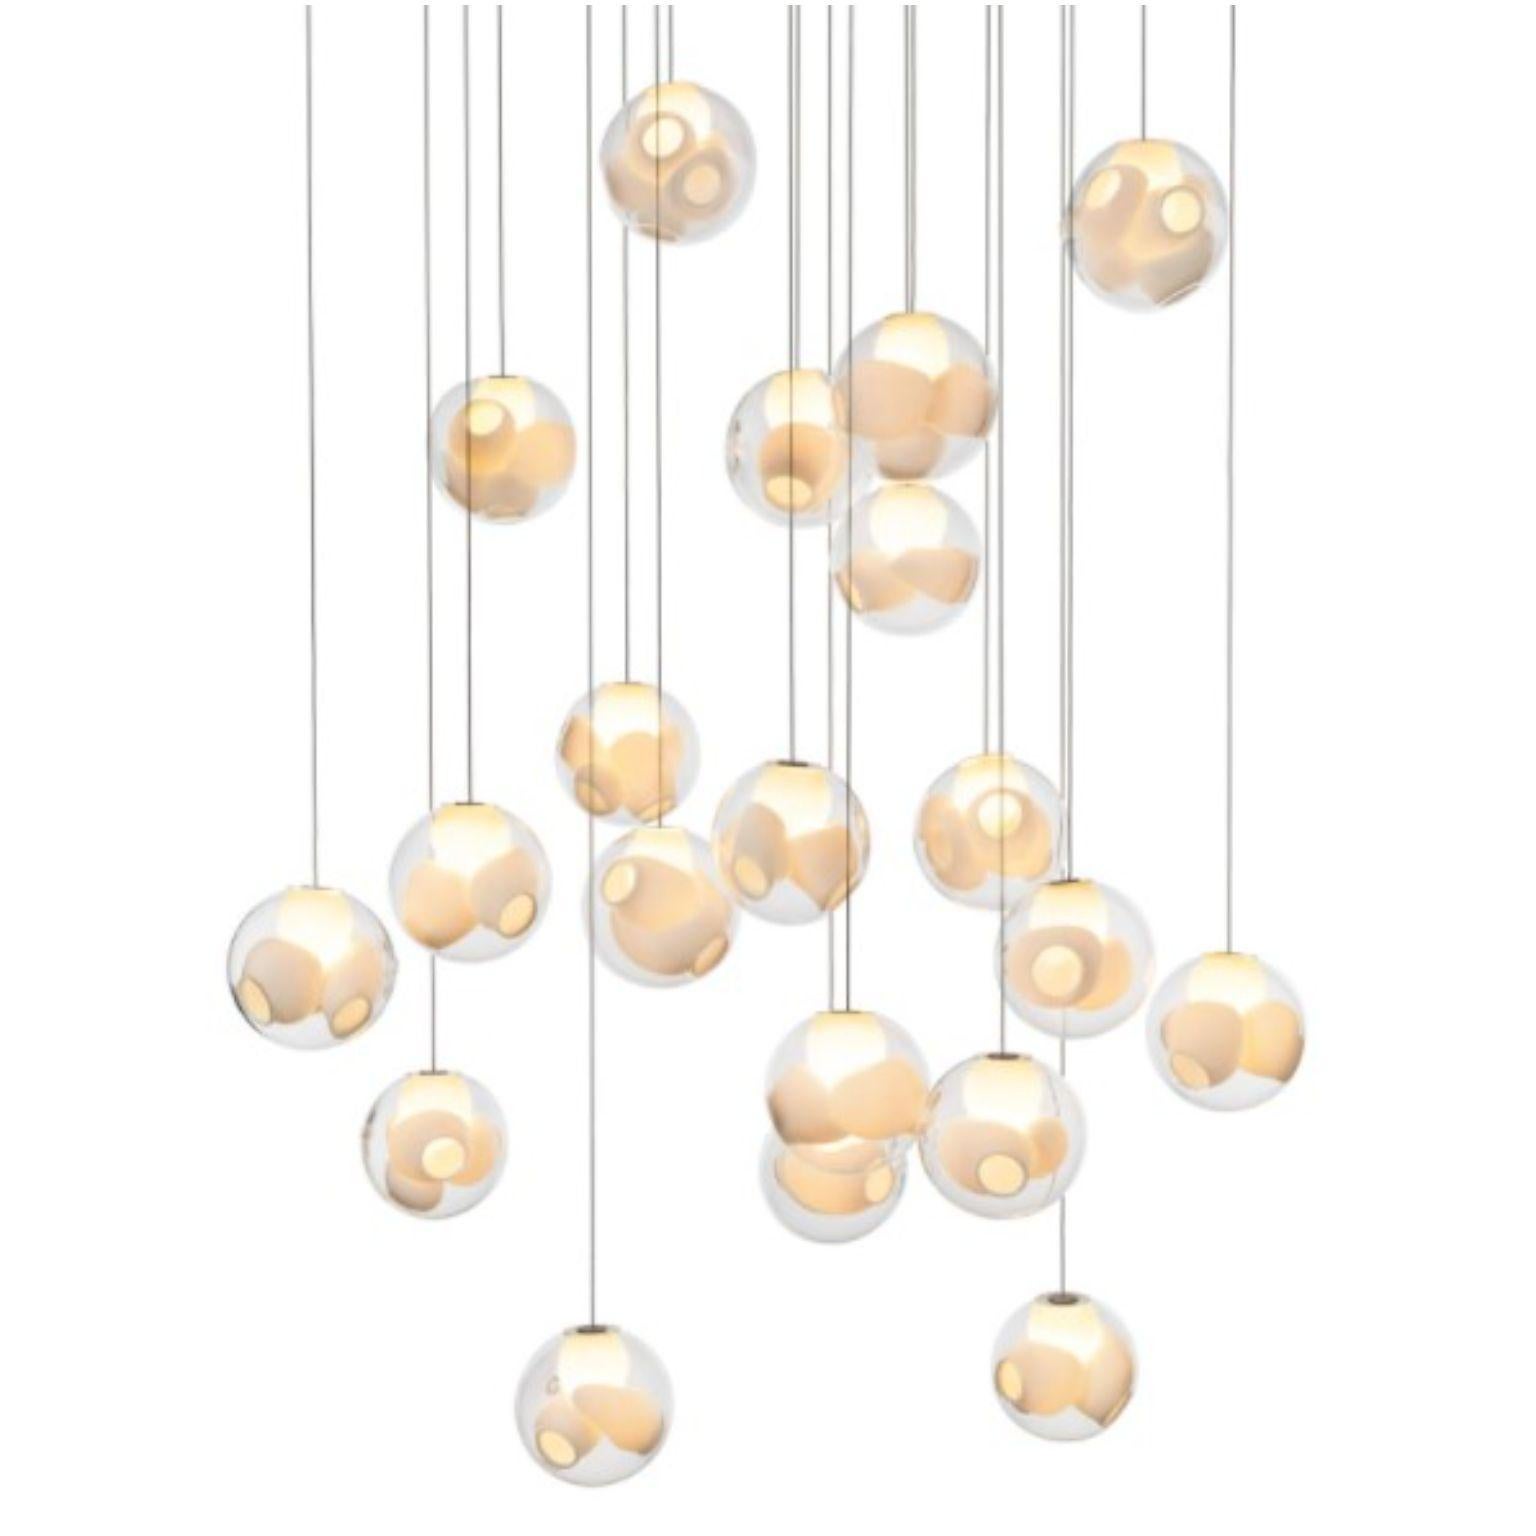 38.20 Pendant by Bocci
Dimensions: D132 x W44.4 x H300 cm
Materials: white powder coated rectangular canopy
Weight: 70 kg
Also available in different dimensions and models.

All our lamps can be wired according to each country. If sold to the